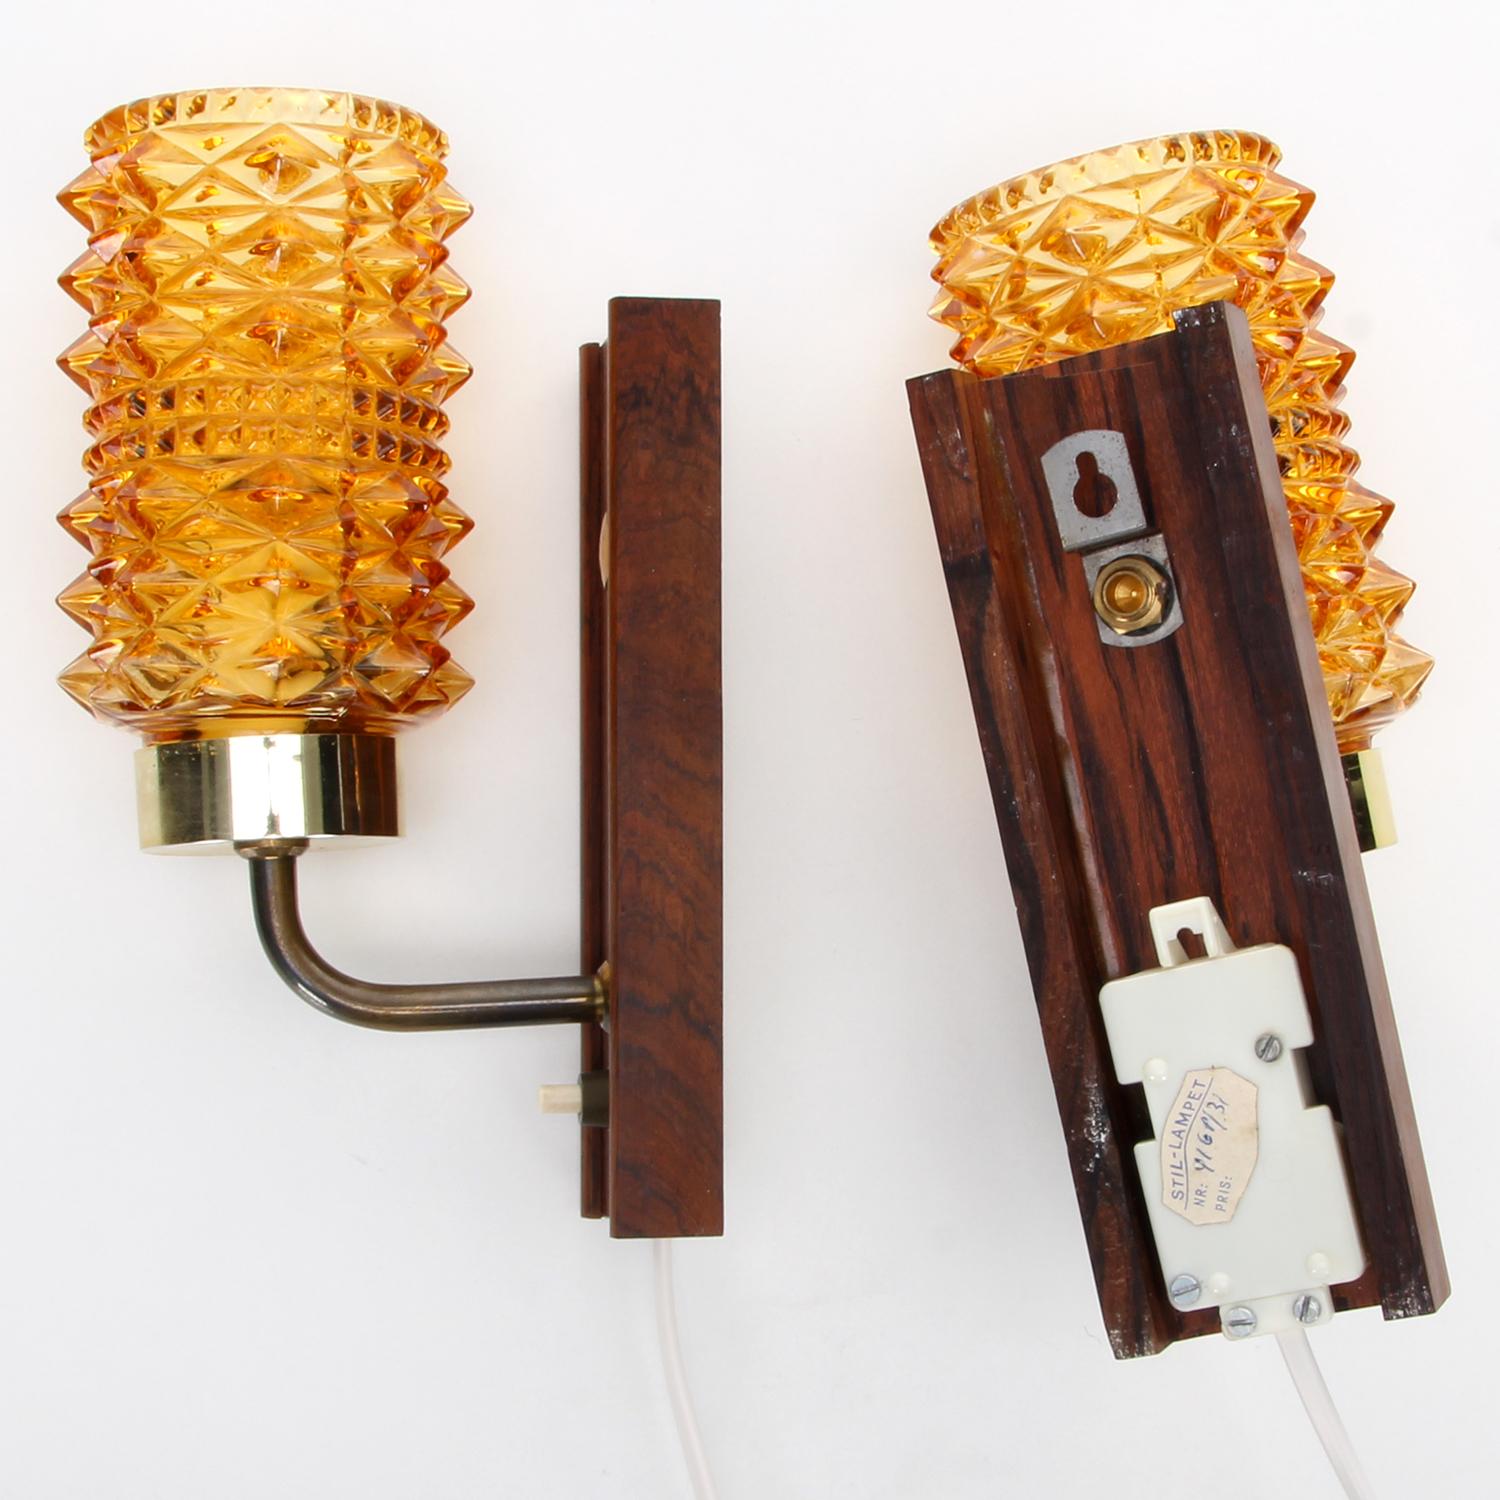 Mid-20th Century Amber & Rosewood Wall Lamps Pair, 1950s Danish Vintage Wall Lights